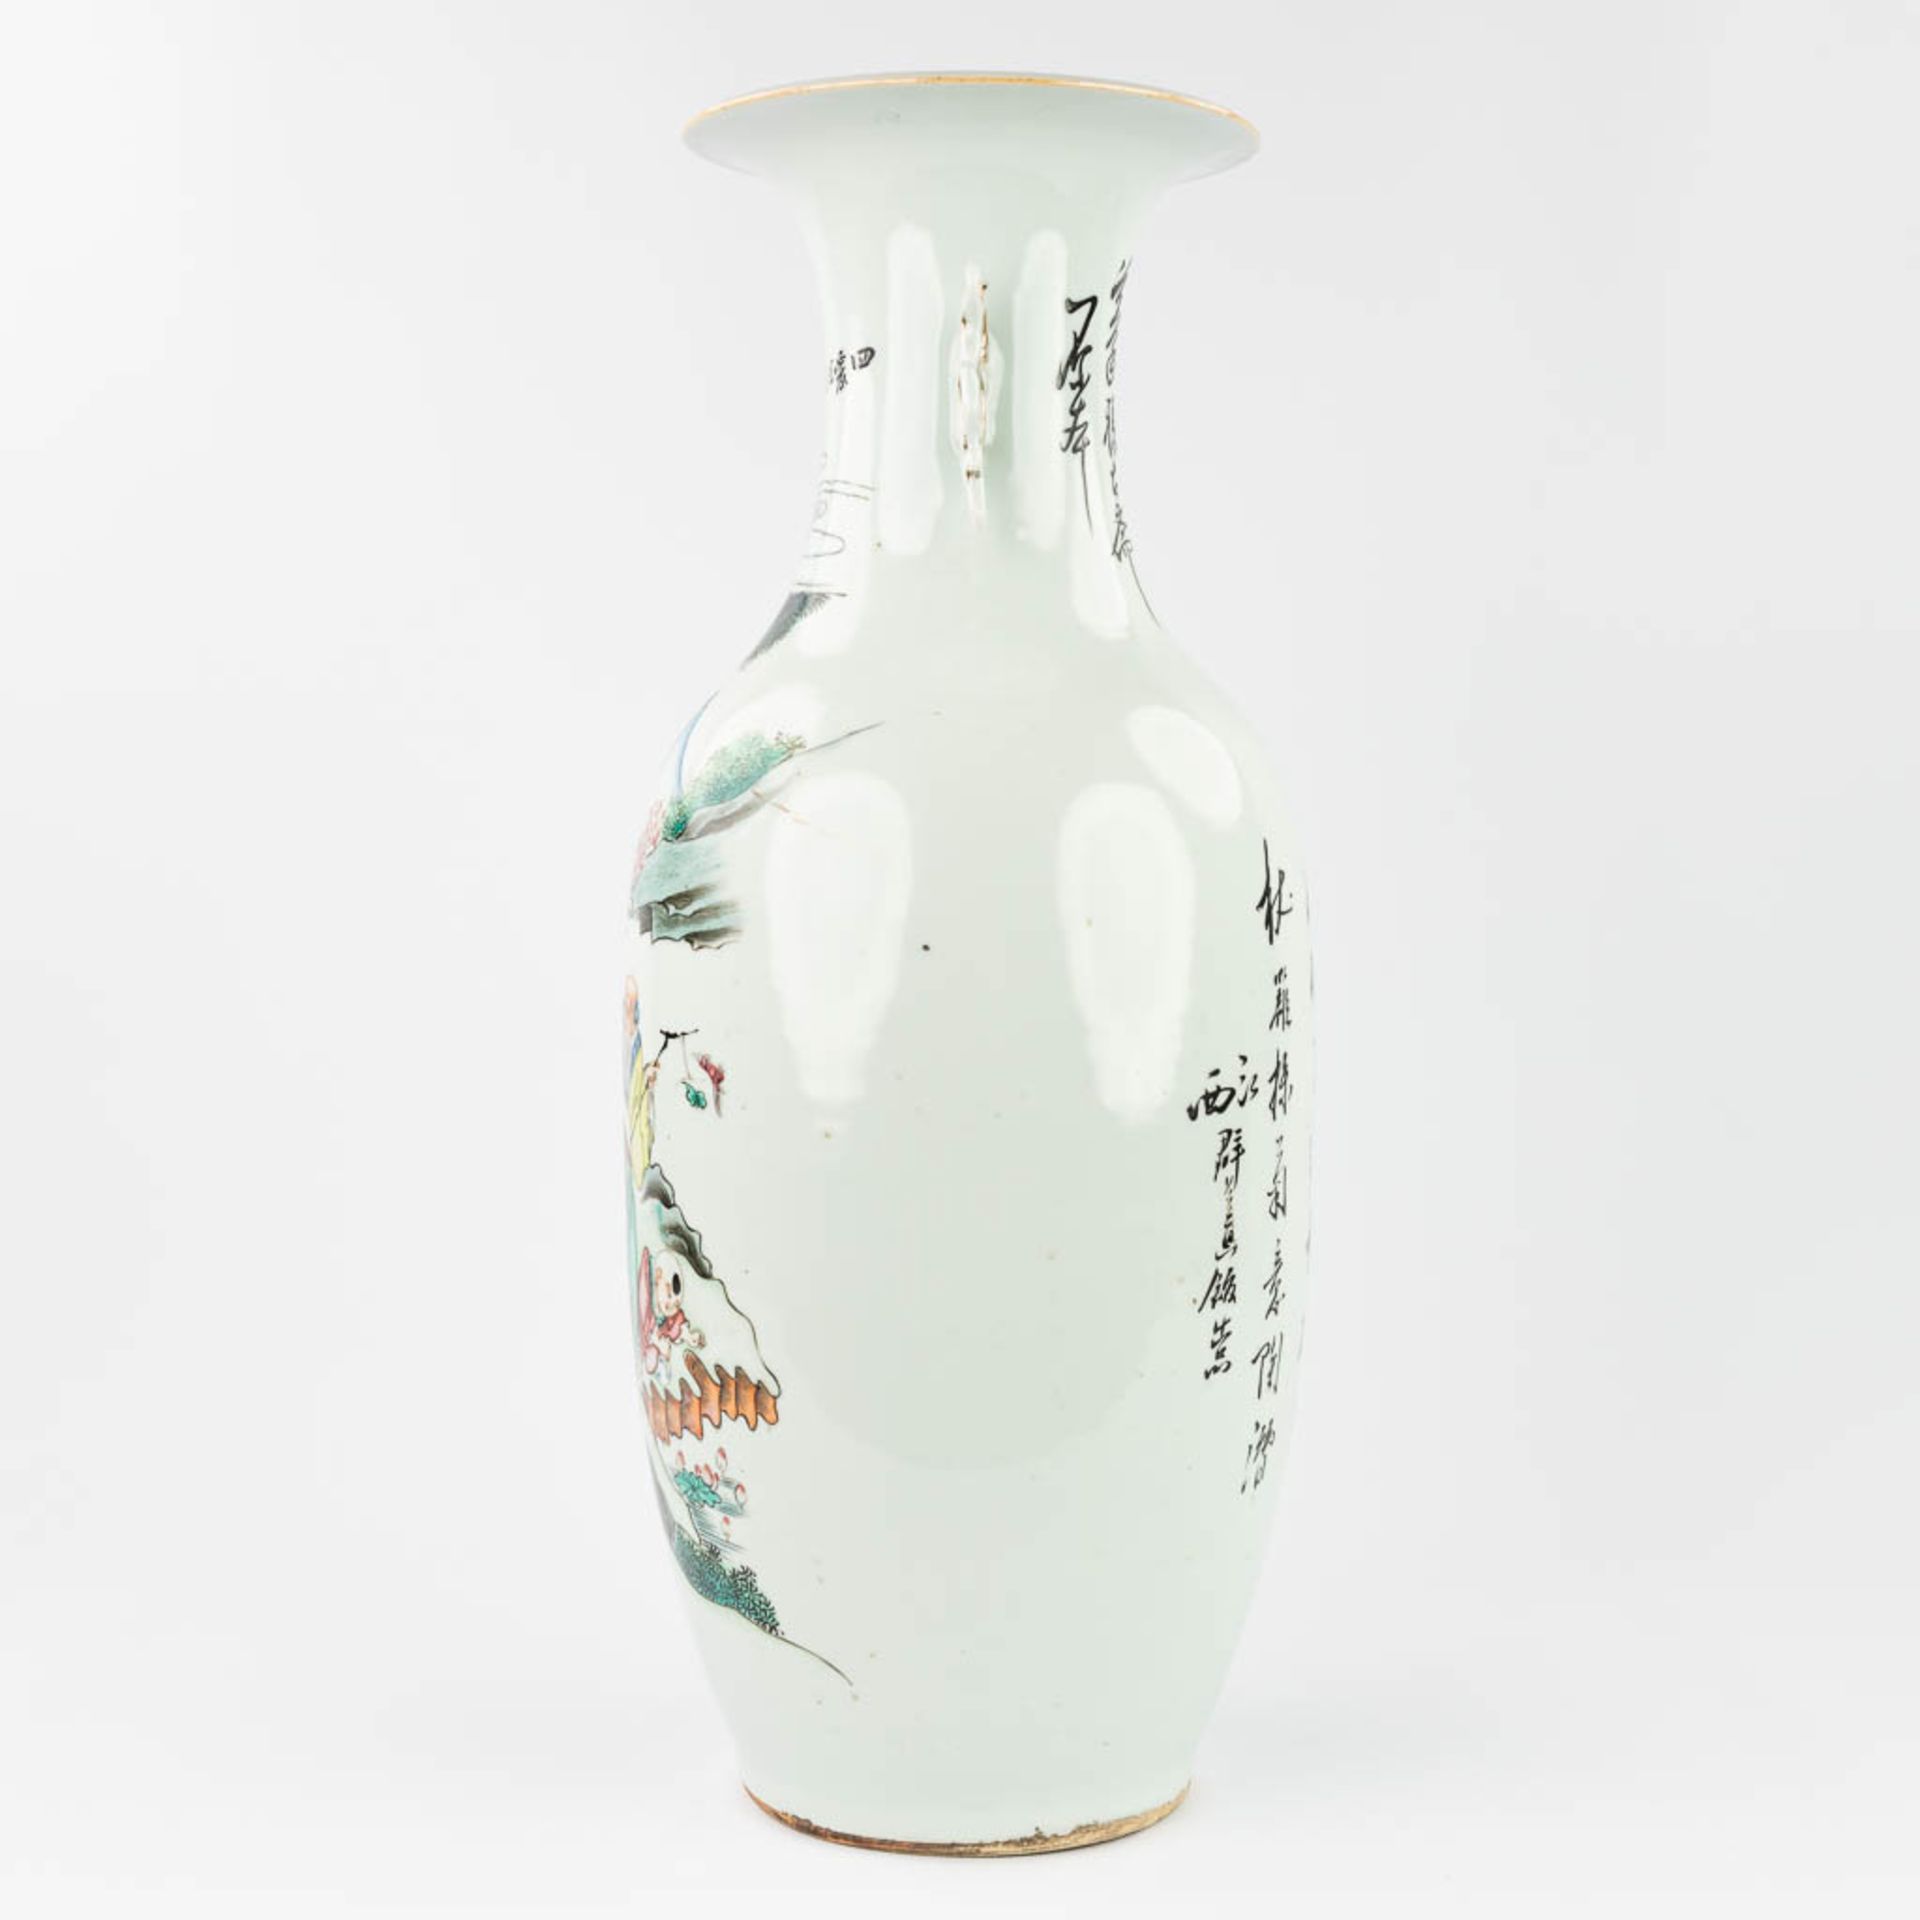 A Chinese vase made of porcelain and decorated with wise men in the garden. (59 x 23 cm) - Image 2 of 14